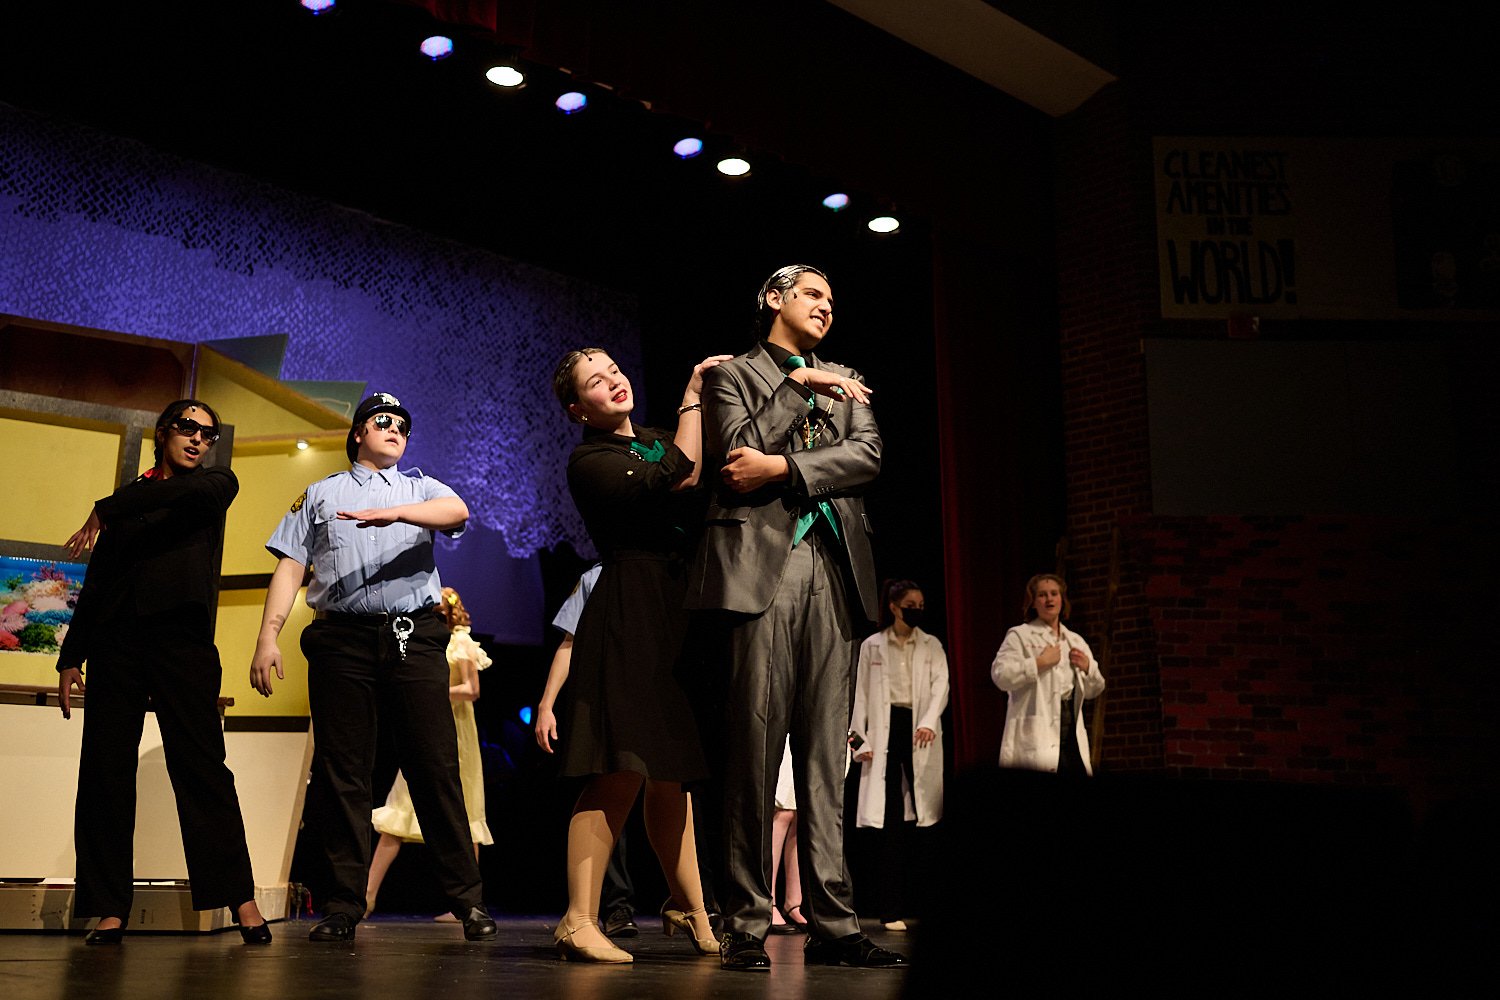  SEWICKLEY, PA, USA - MARCH 2ND 2022: High School students of Sewickley Academy are performing in an annual musical show “Urinetown” running on March 3rd-5th 2022. Grace Armutat 